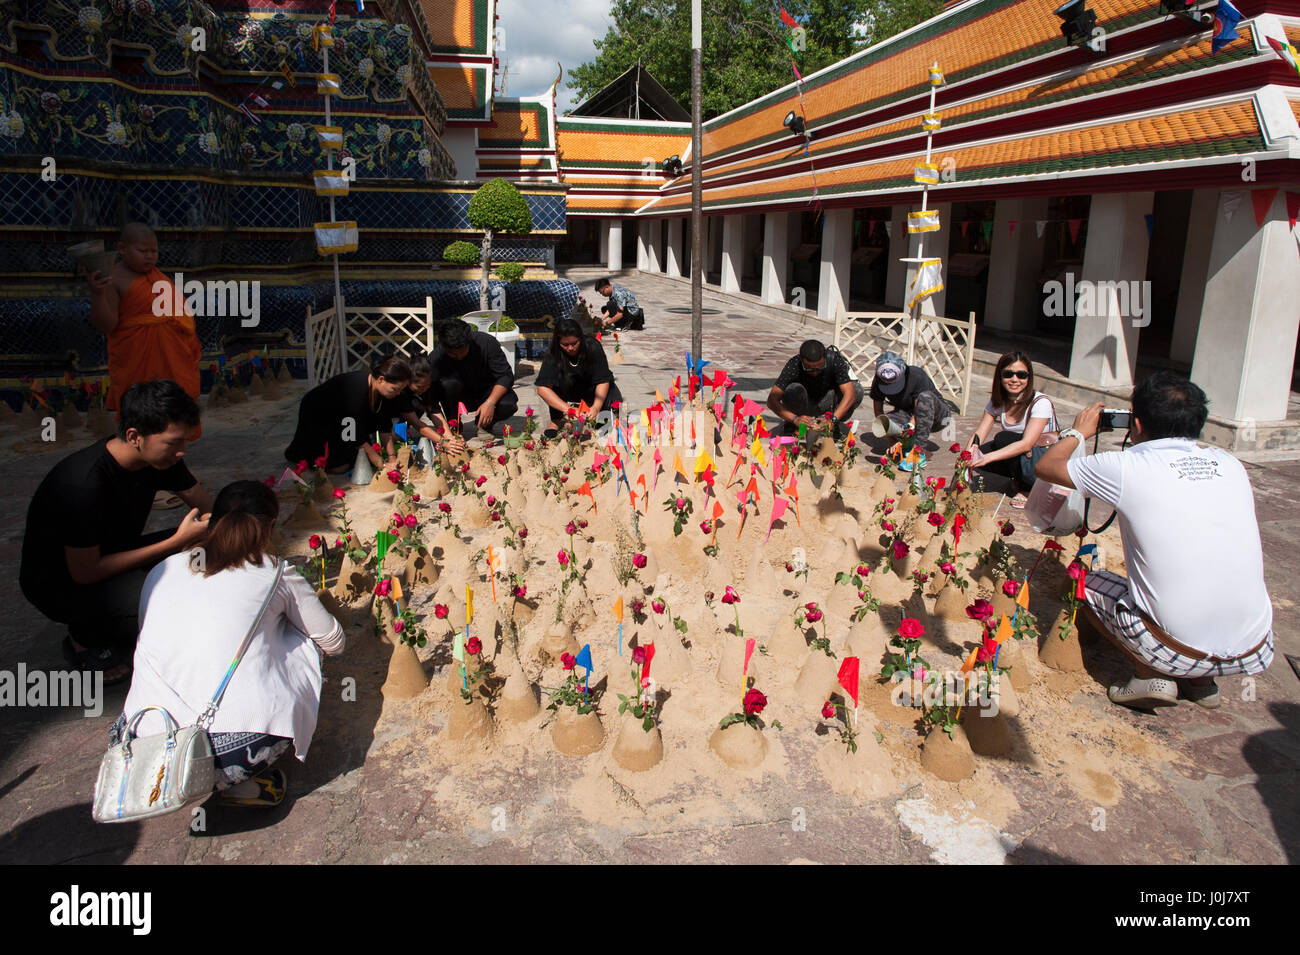 Bangkok, Thailand. 13th Apr, 2017. 13 April, 2017. Thai people use sand to build miniature Buddhist stupas statue as part of celebrations of the Songkran Festival celebrations in Bangkok, Thailand. Credit: Anusak Laowilas/Pacific Press/Alamy Live News Stock Photo